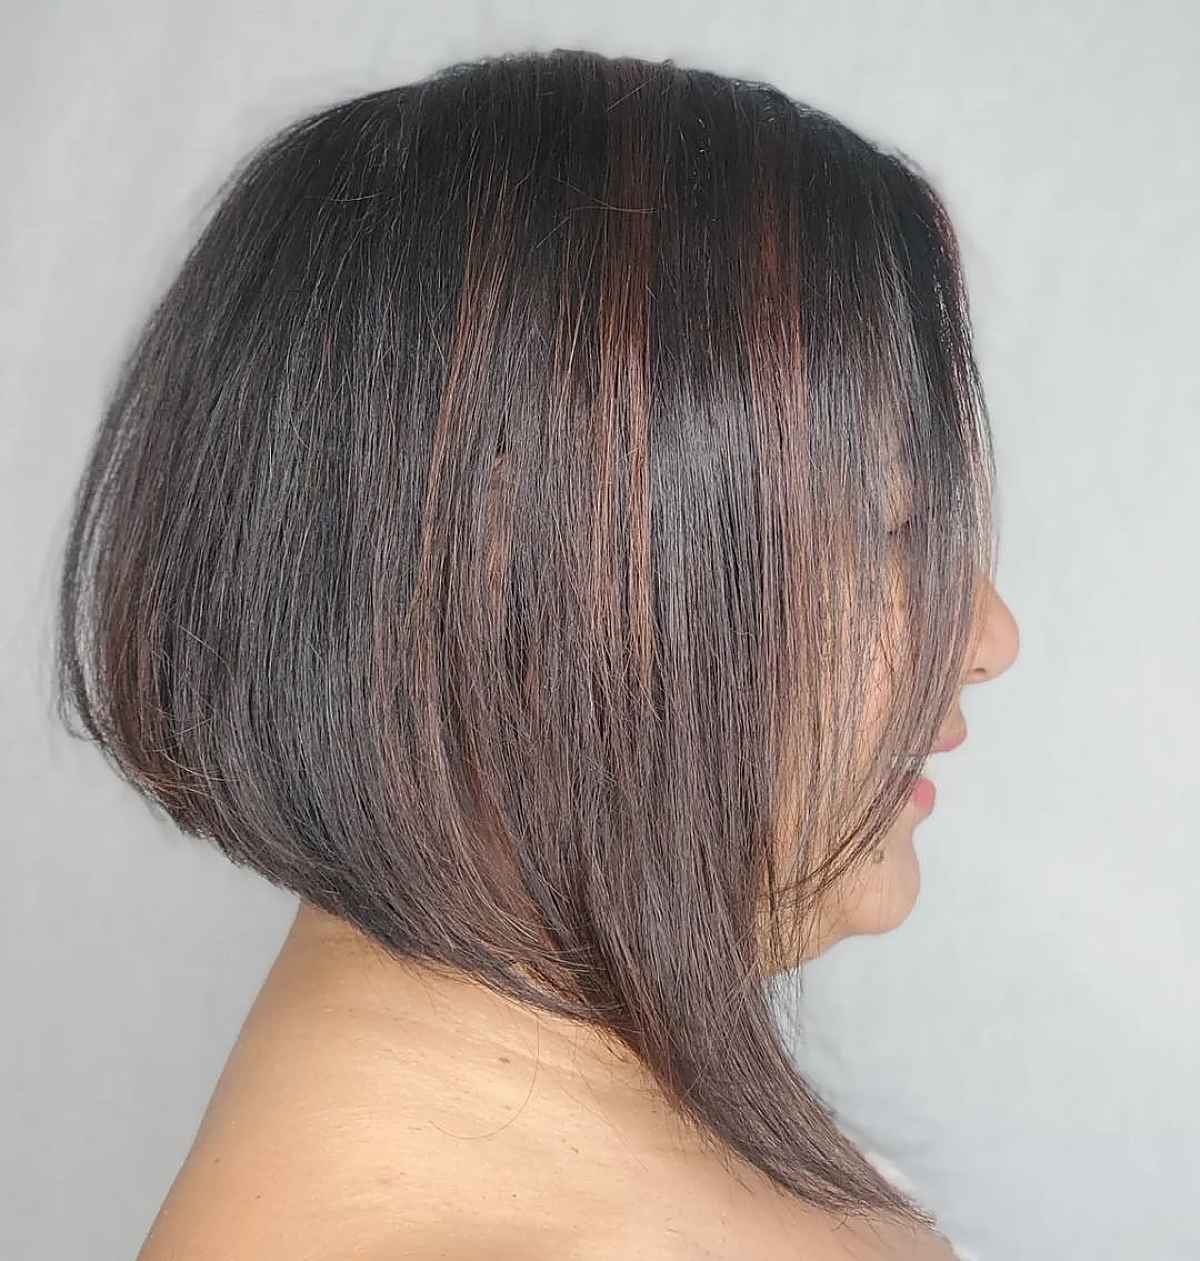 Low-Maintenance Long Angled Bob for a Woman Over 60